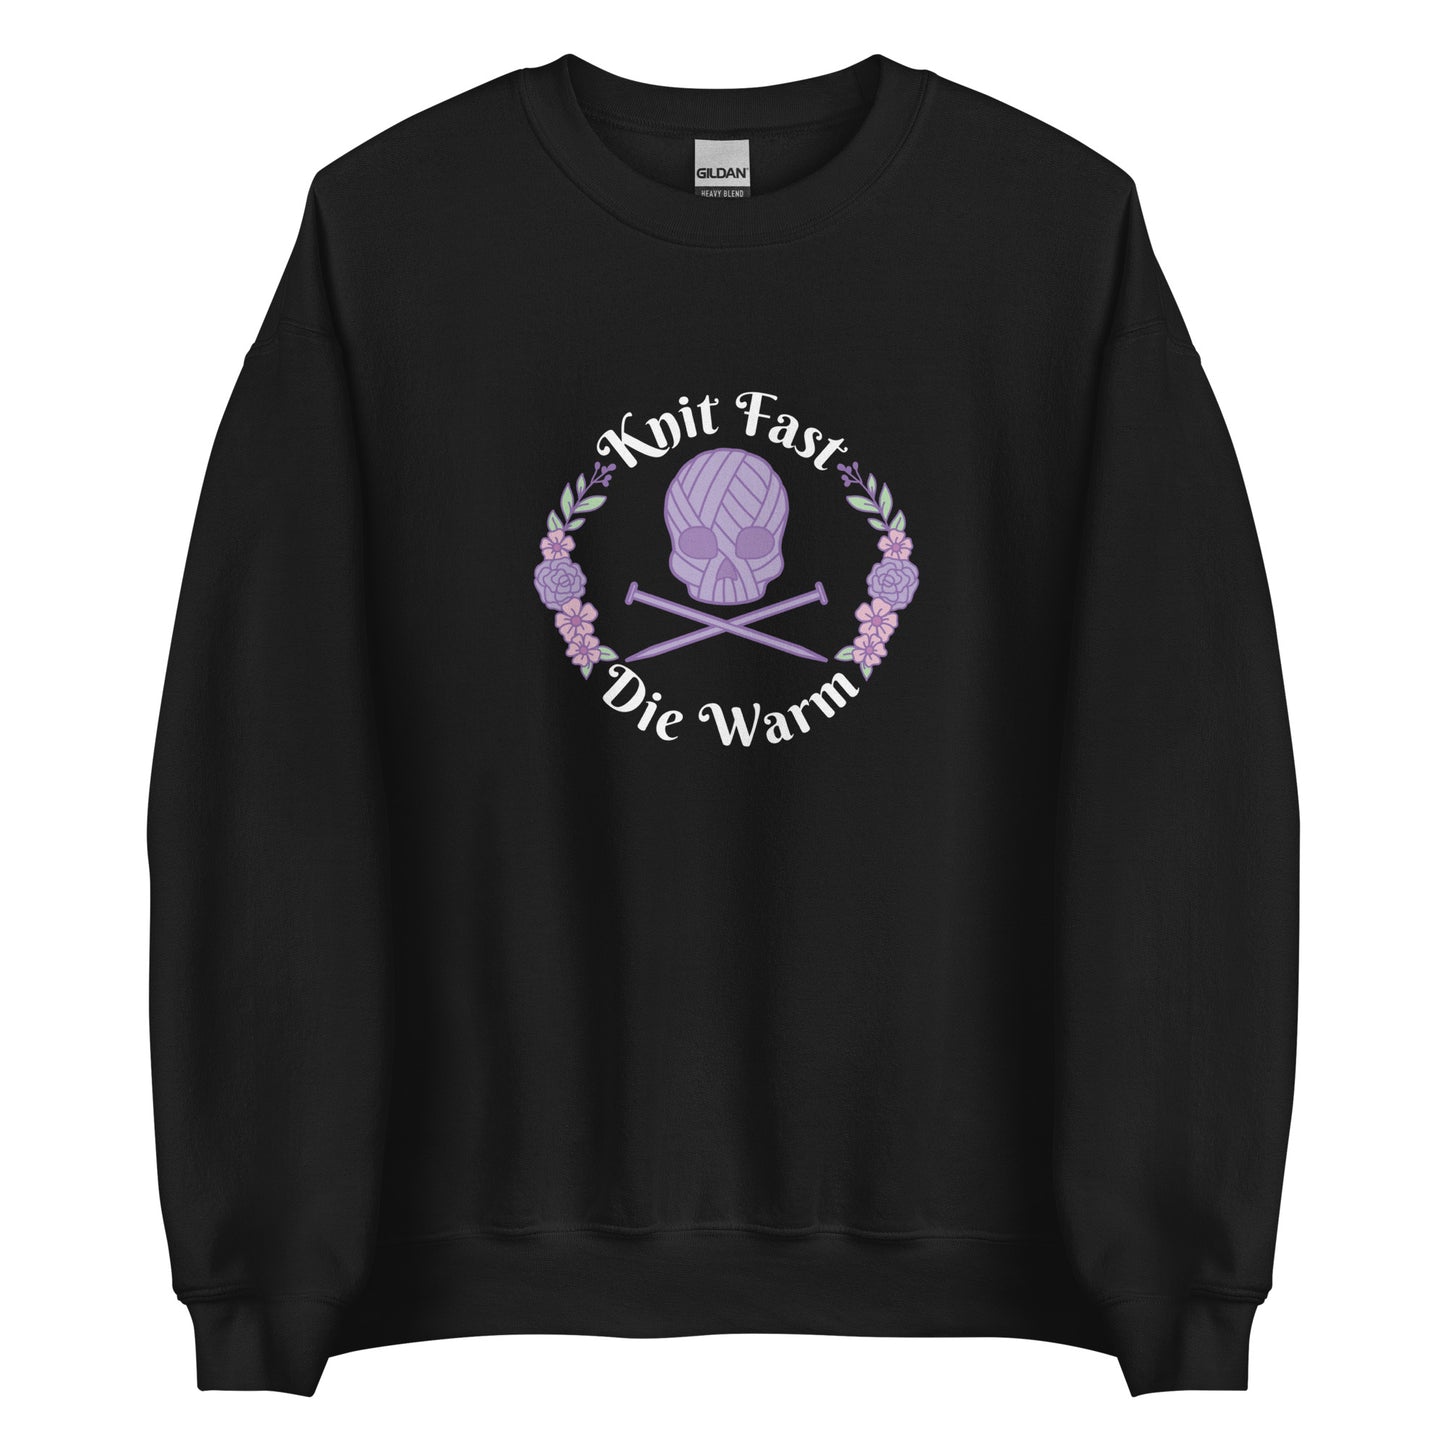 A black crewneck sweatshirt featuring an image of a skull and crossbones made of yarn and knitting needles. A floral wreath surrounds the skull, along with words that read "Knit Fast, Die Warm"